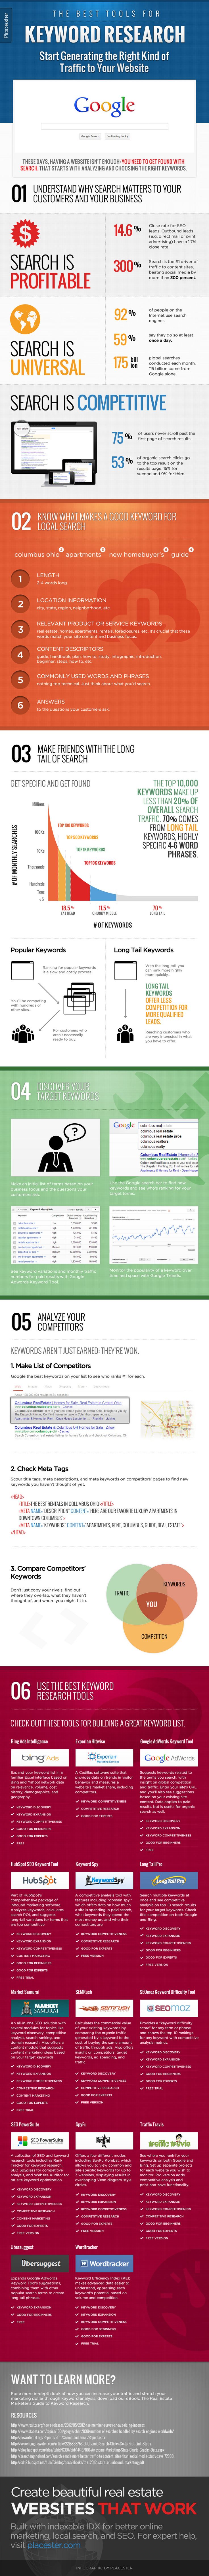 1549757000_157_Advertising-Infographics-5-Incredible-Keyword-Research-Analysis-Tips-Infographics-www.socialmediama Advertising Infographics : 5 Incredible Keyword Research Analysis Tips #Infographics www.socialmediama...